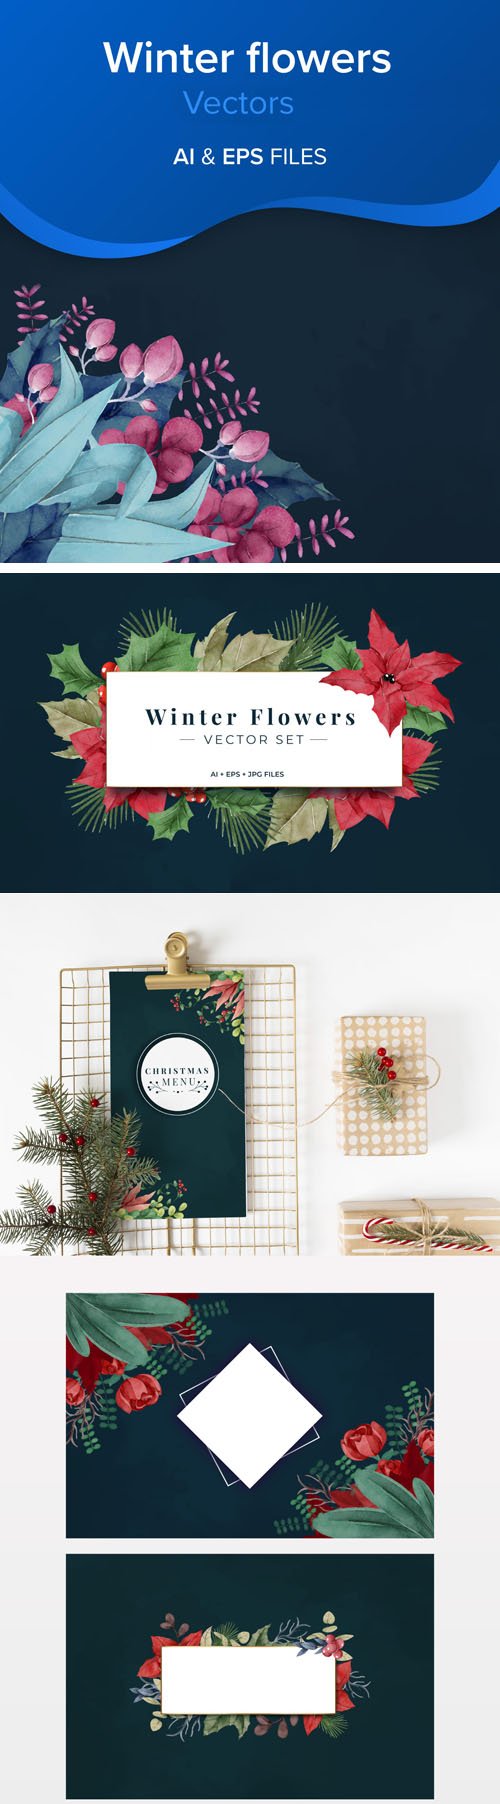 Decorative Winter Flowers Vector Set Collection